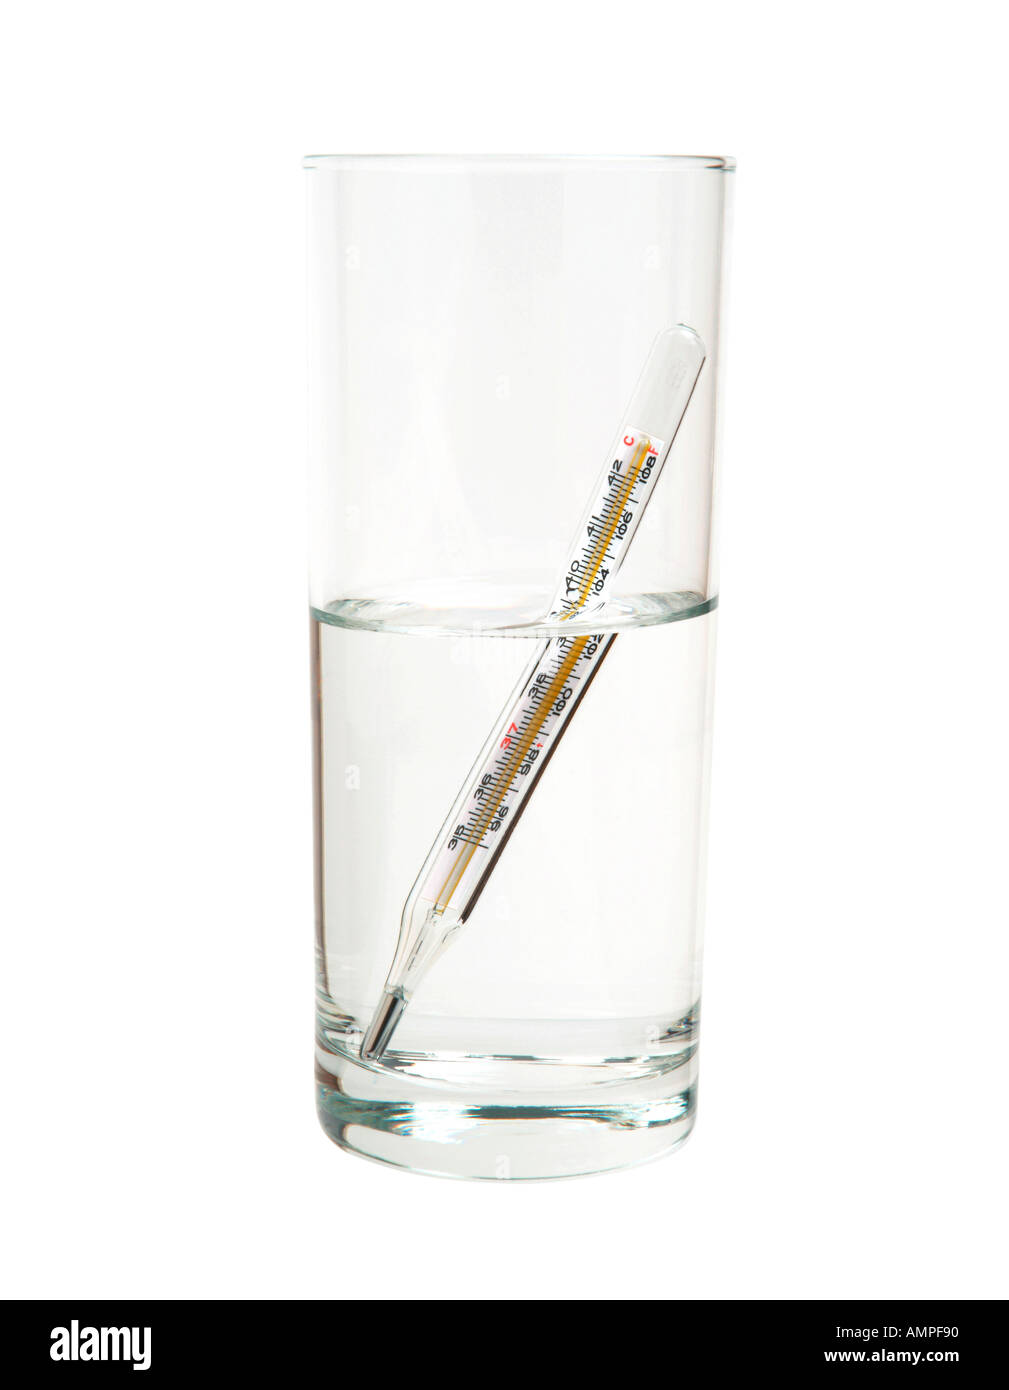 https://c8.alamy.com/comp/AMPF90/thermometer-in-a-glass-of-water-AMPF90.jpg